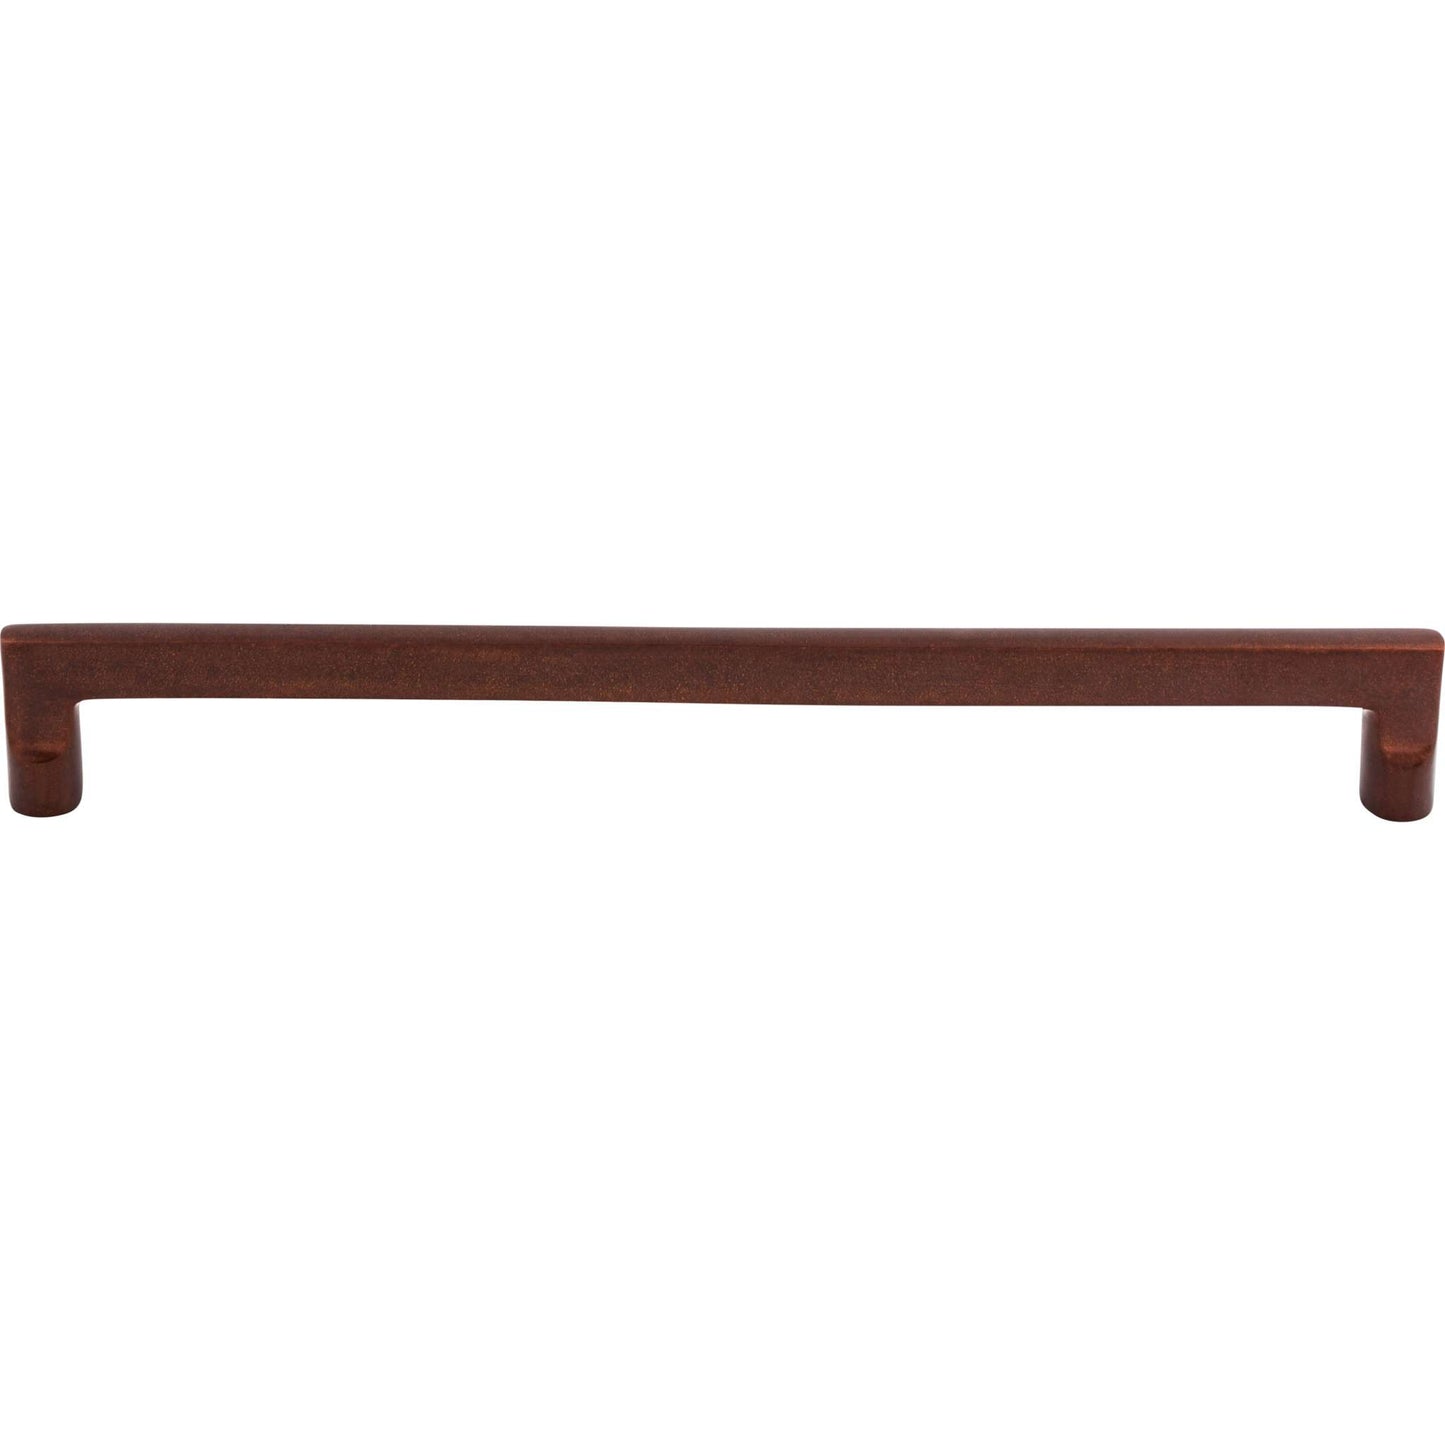 Top Knobs - Aspen Flat Sided Pull